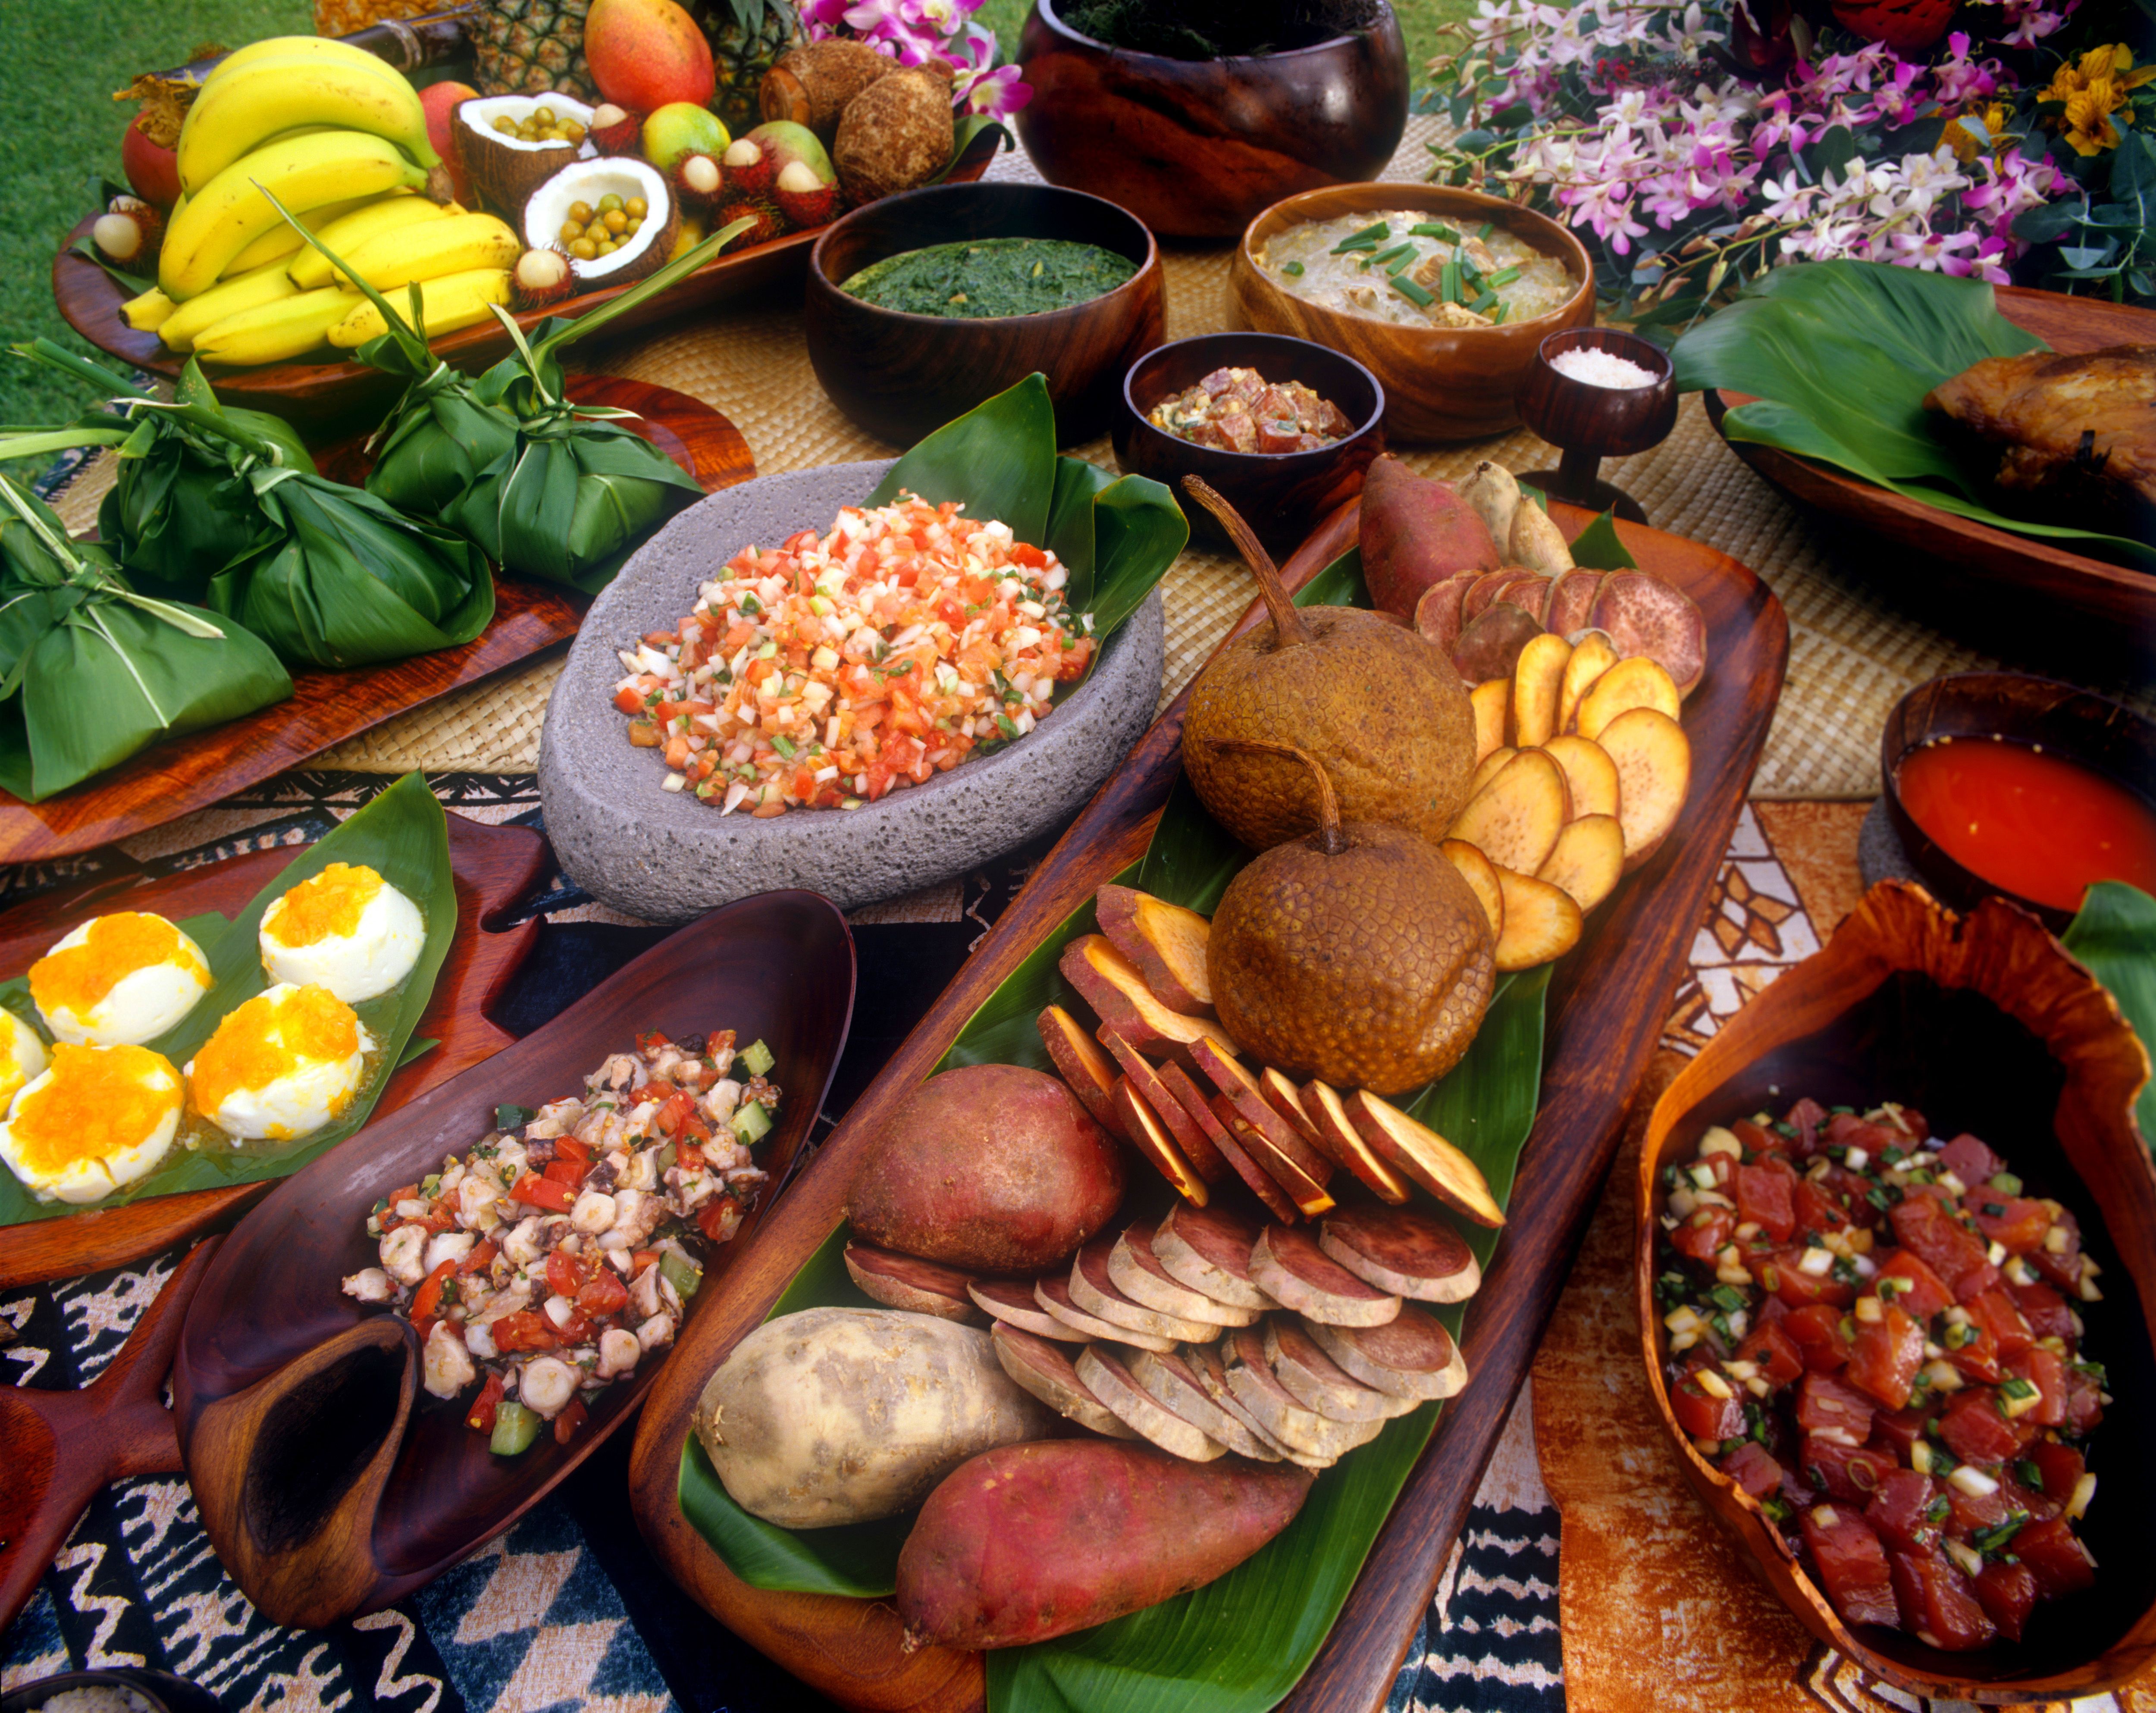 A vegan table spread. | Source: Getty Images